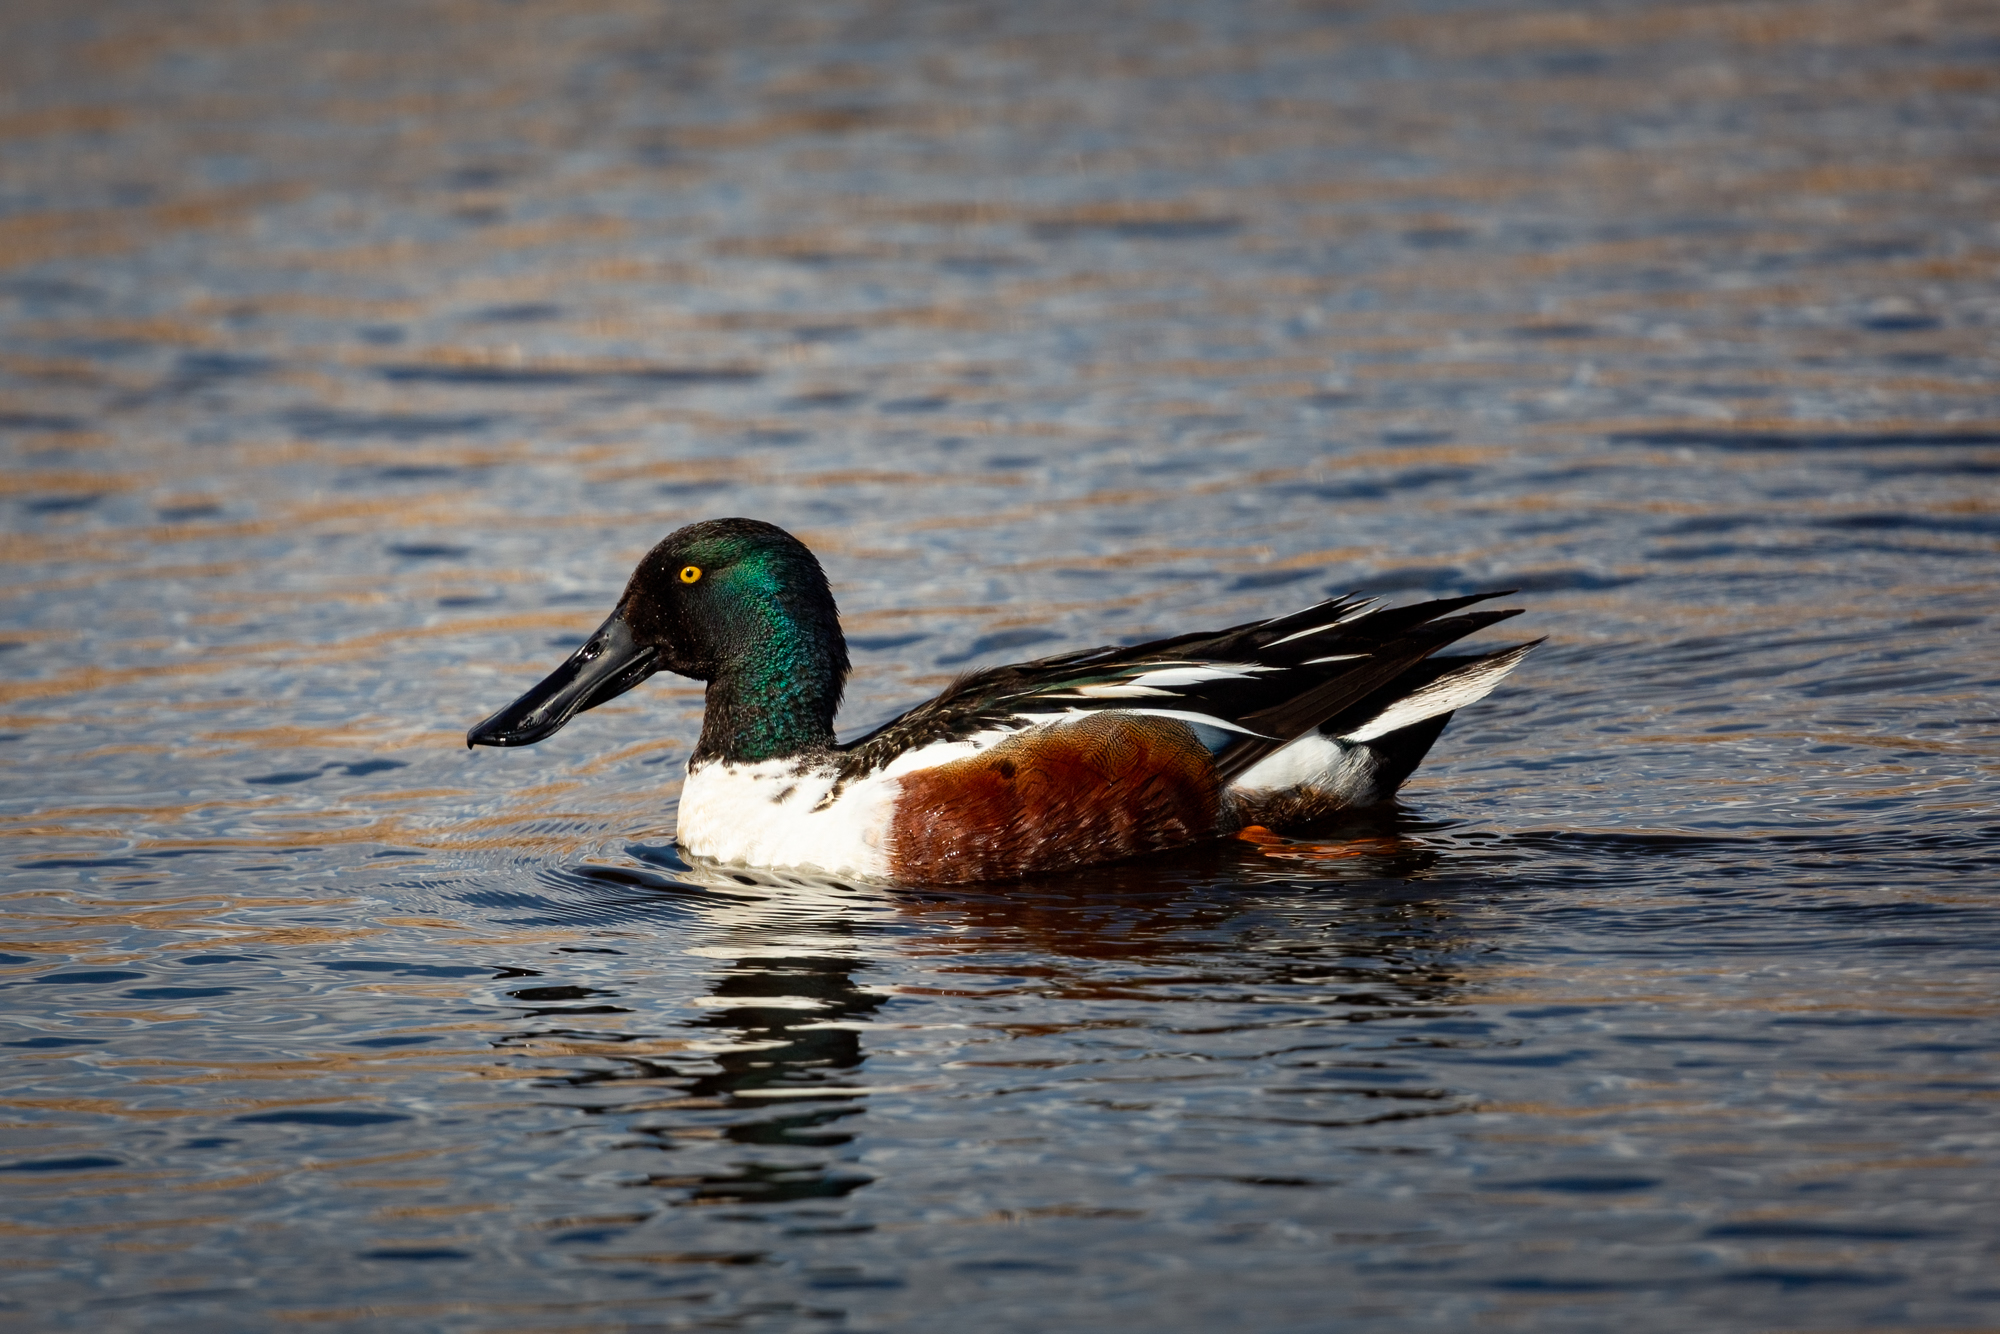 Northern Shoveler in the water